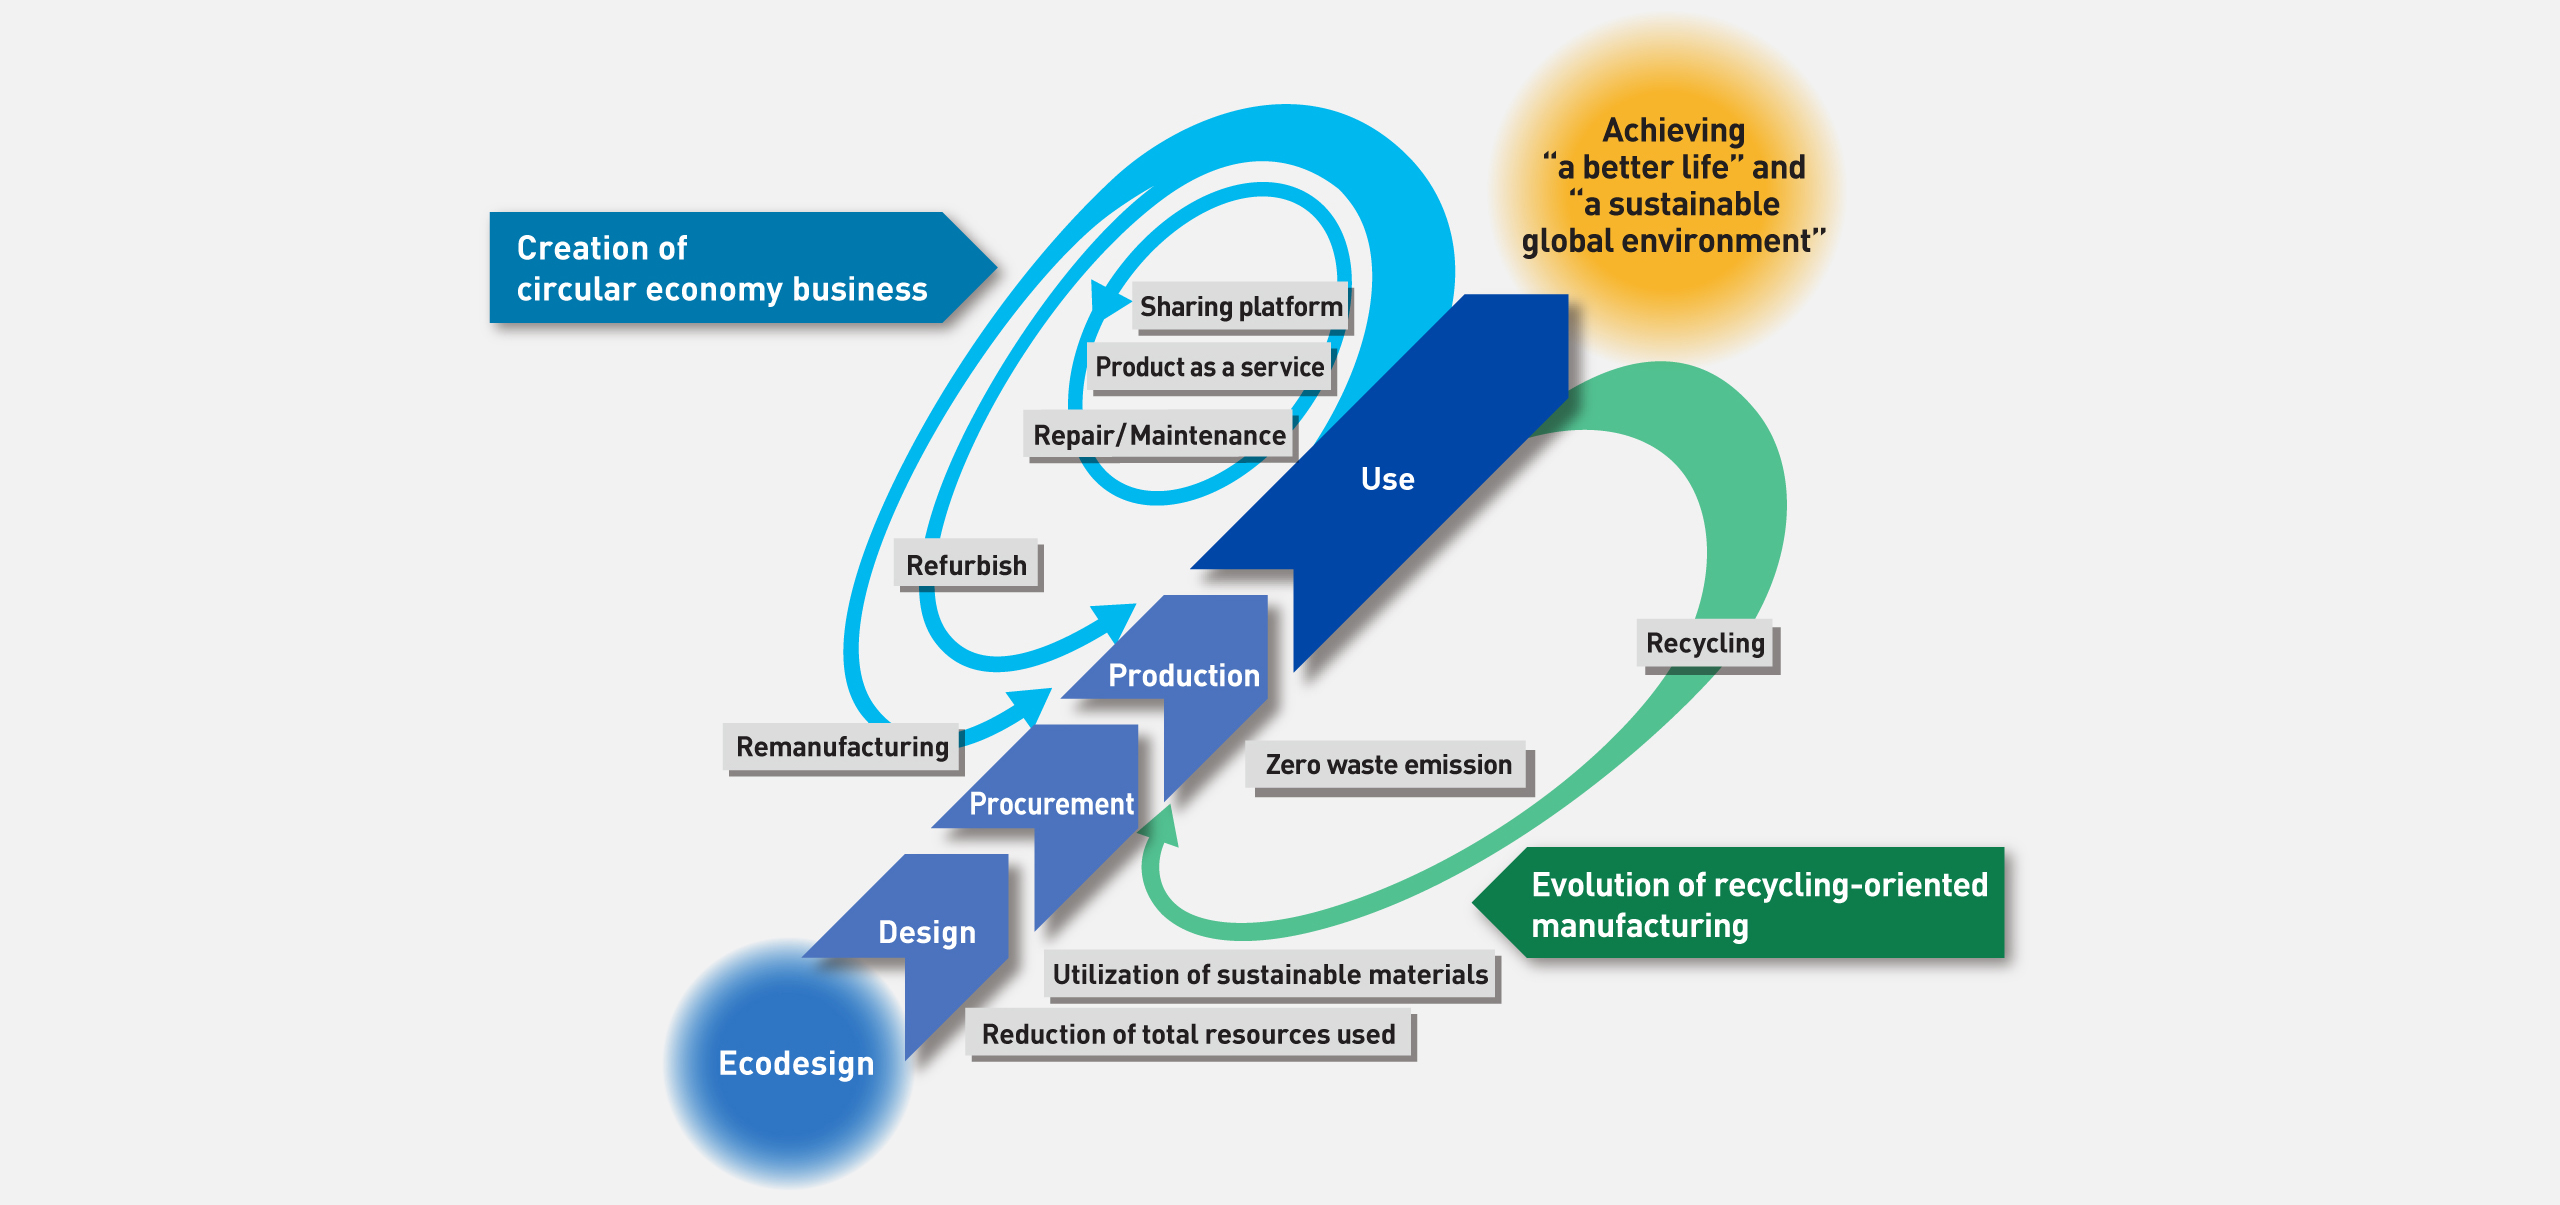 A diagram illustrating the concept of a circular economy initiative, indicating that Panasonic is pursuing resource efficiency and maximizing customer value through two approaches: the evolution of recycling-oriented manufacturing and the creation of circular economy businesses. These activities are categorized into four steps: design, procurement, production, and use, based on the concept of eco-design, and aiming to achieve both a better life and a sustainable global environment. In the evolution of recycling-oriented manufacturing, efforts focus on reducing resources used, utilizing sustainable resources, achieving zero waste emissions, and recycling. In the creation of circular economy businesses, efforts focus on remanufacturing, refurbishing, repair/maintenance, product-as-a-service, and sharing platforms.